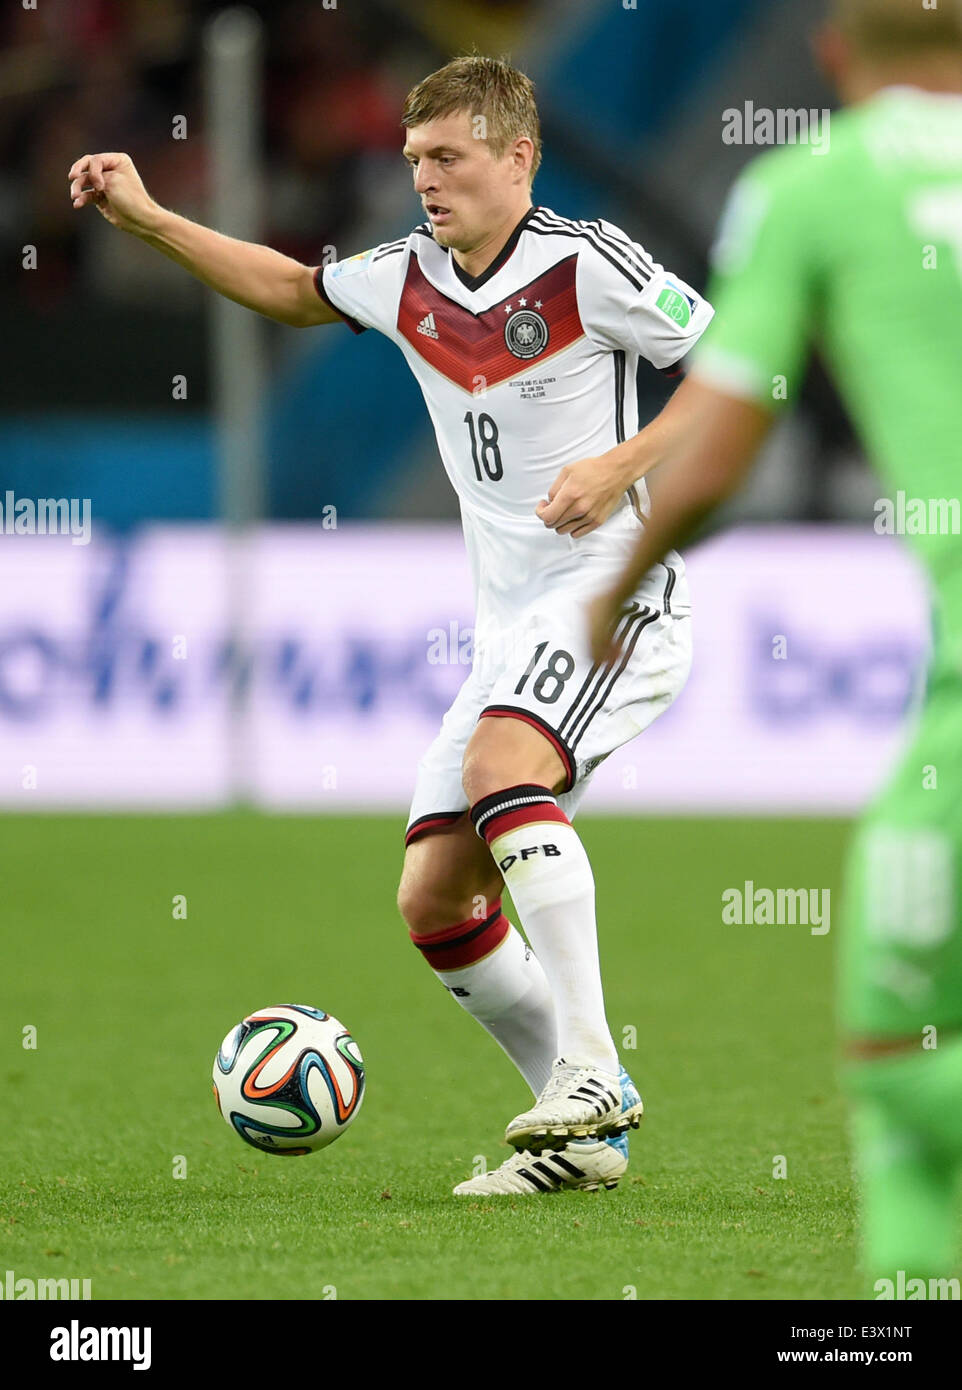 Porto Alegre, Brazil. 30th June, 2014. Germany's Toni Kroos in action during the FIFA World Cup 2014 round of 16 soccer match between Germany and Algeria at the Estadio Beira-Rio in Porto Alegre, Brazil, 30 June 2014. Photo: Andreas Gebert/dpa/Alamy Live News Stock Photo